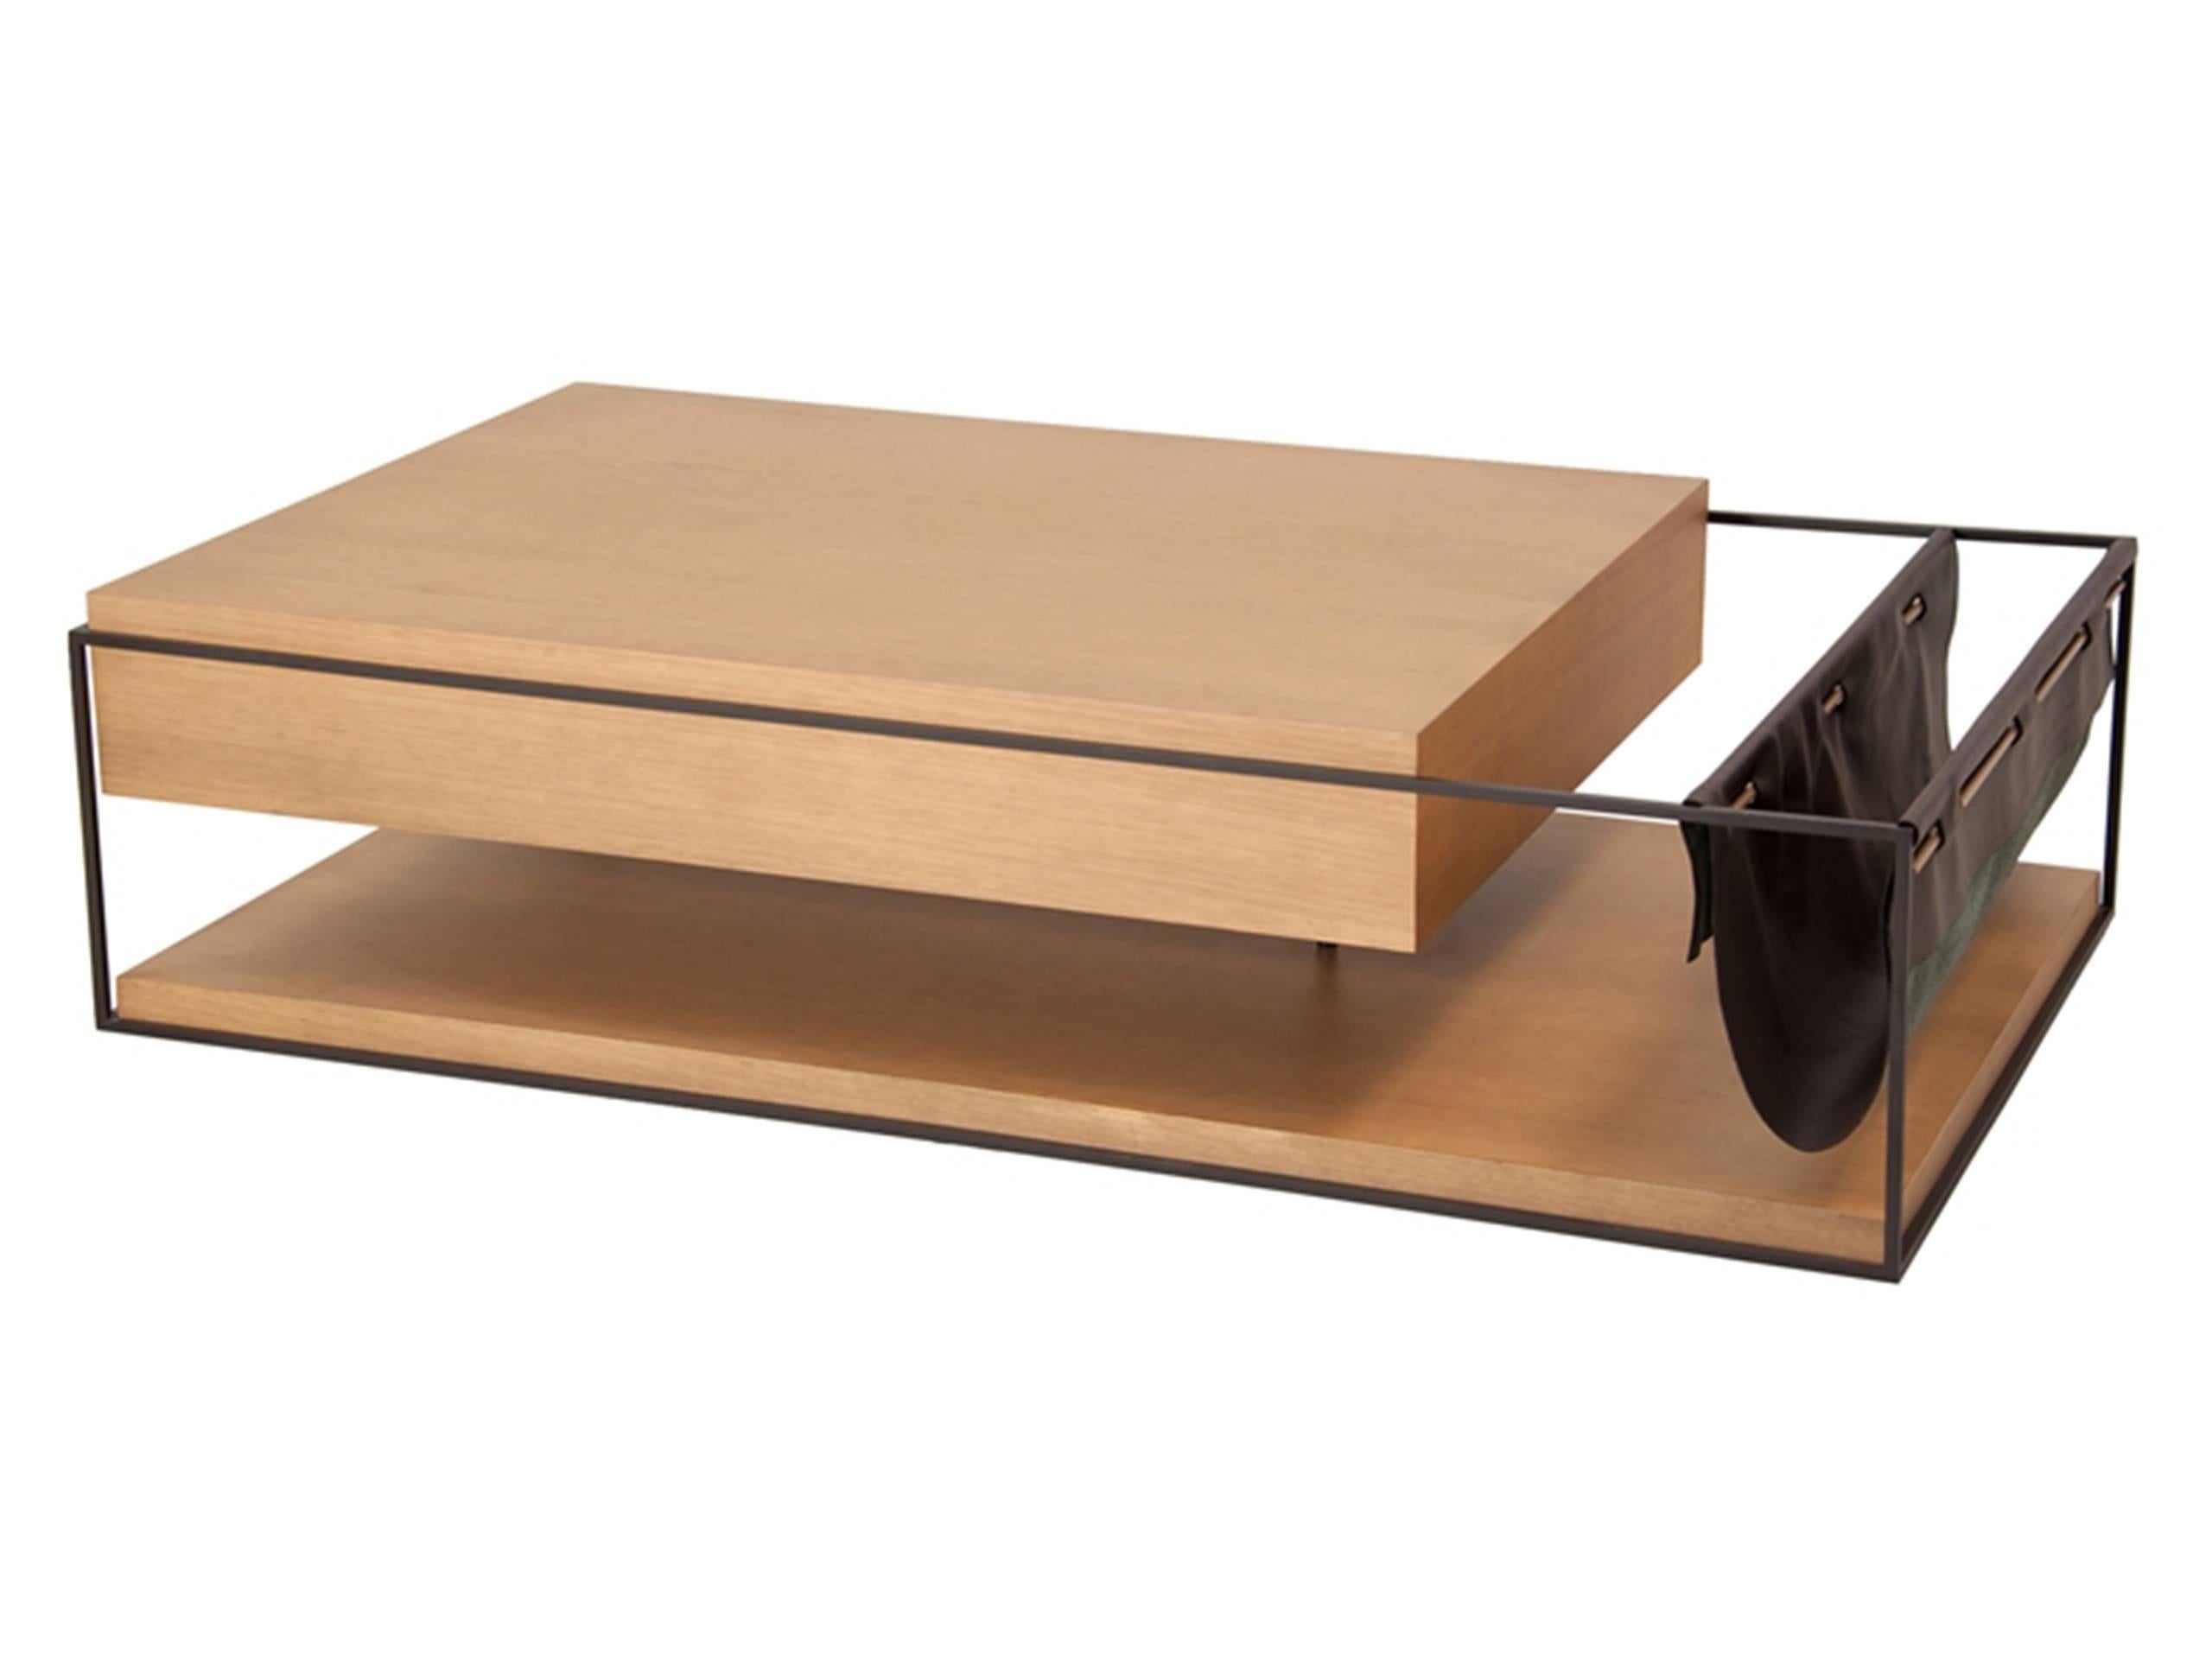 The magazine holder placed within the table structure creates a harmonious combination of different materials.